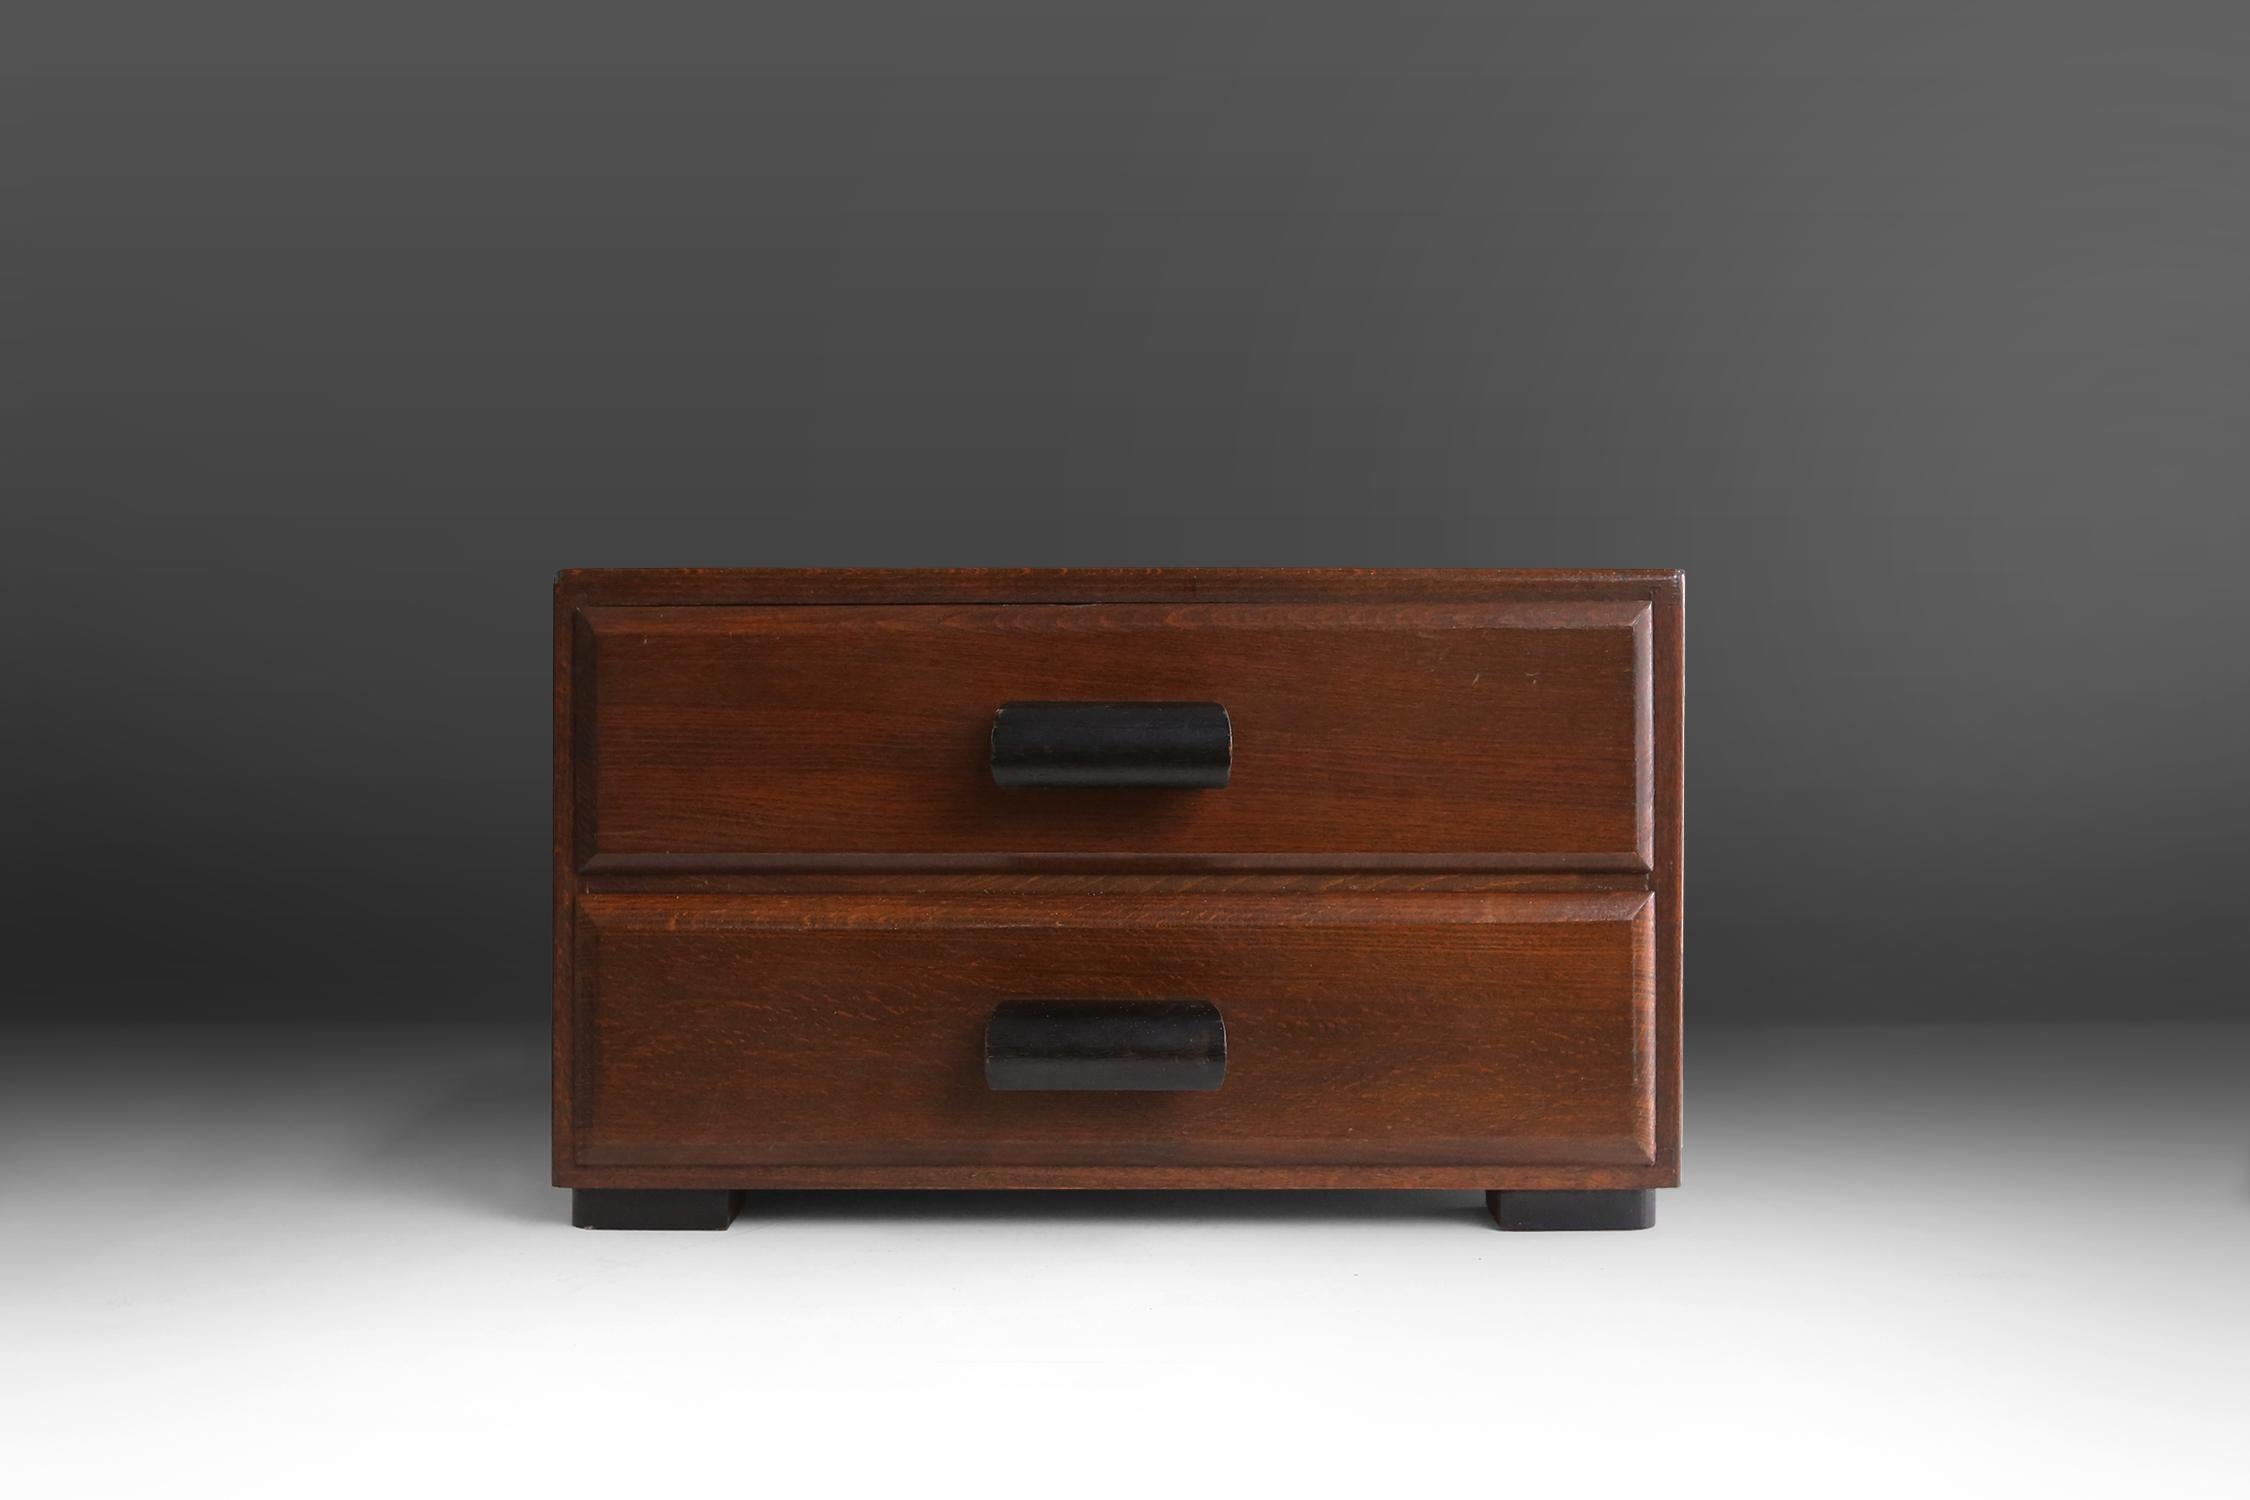 Small Art Deco chest of drawers made around 1930 in Belgium. Whit some nice Art Deco handles.